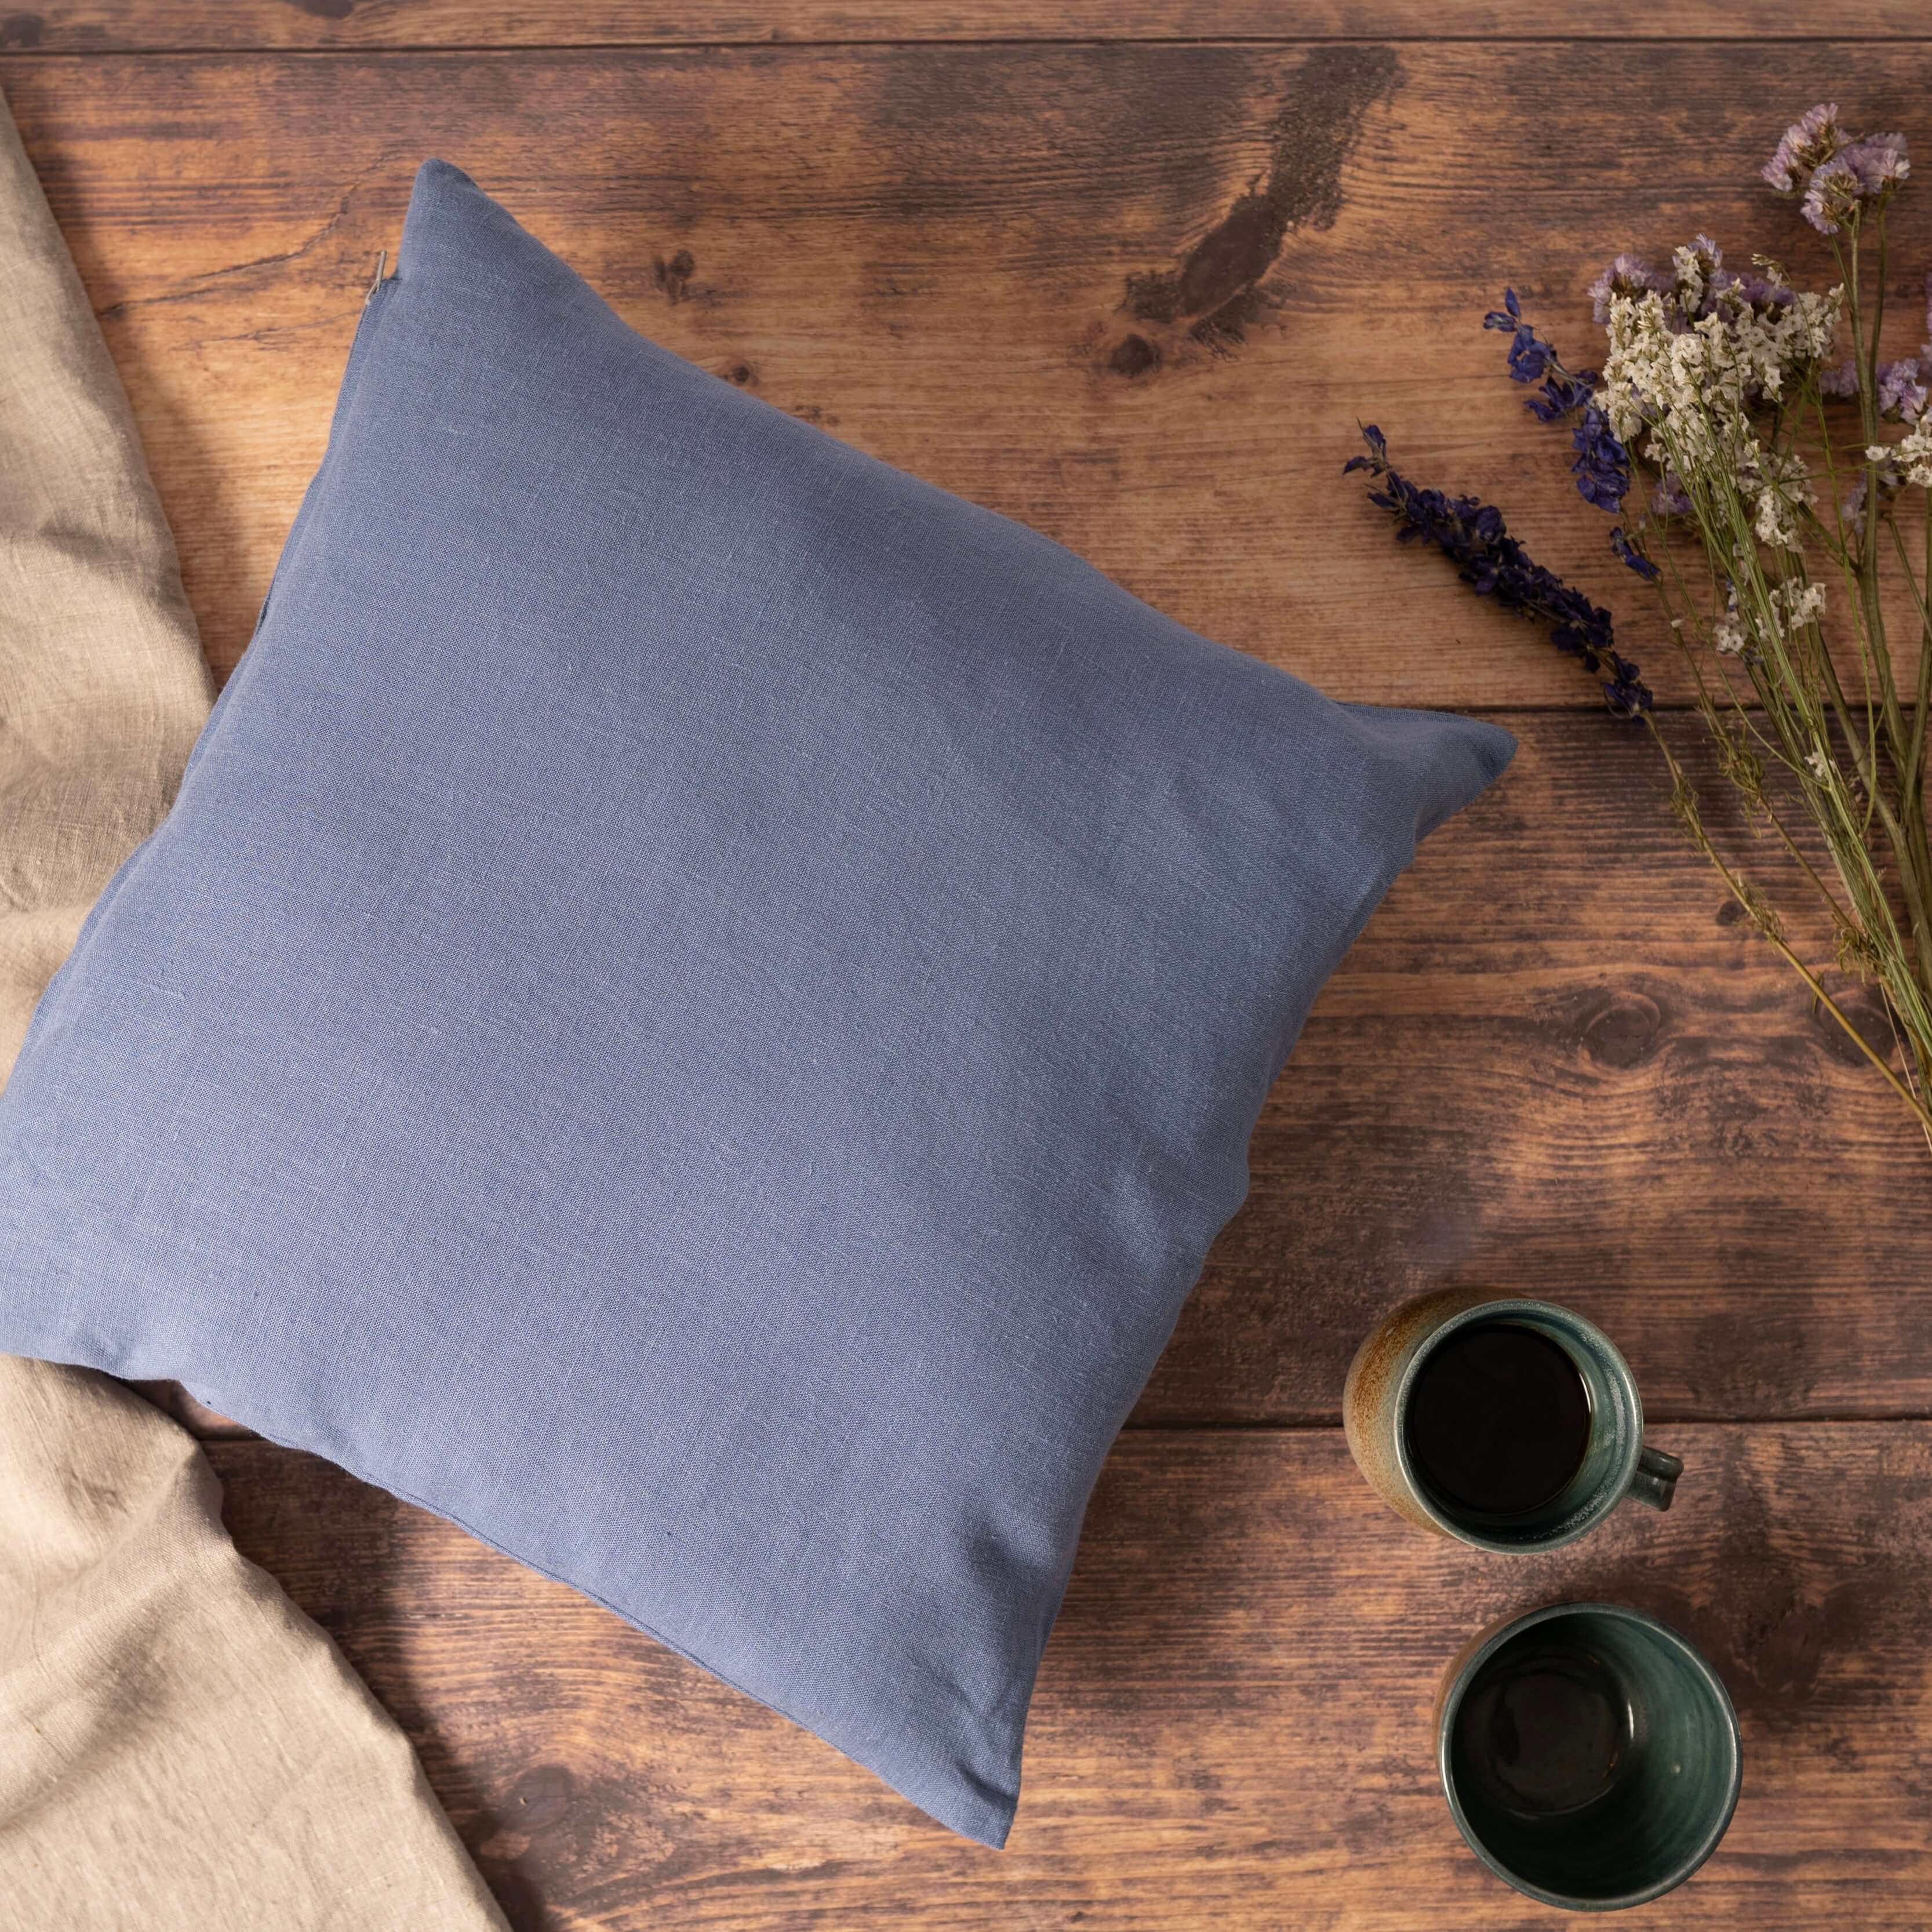 Dusty blue linen cushion cover on wooden table with coffee and wild flowers